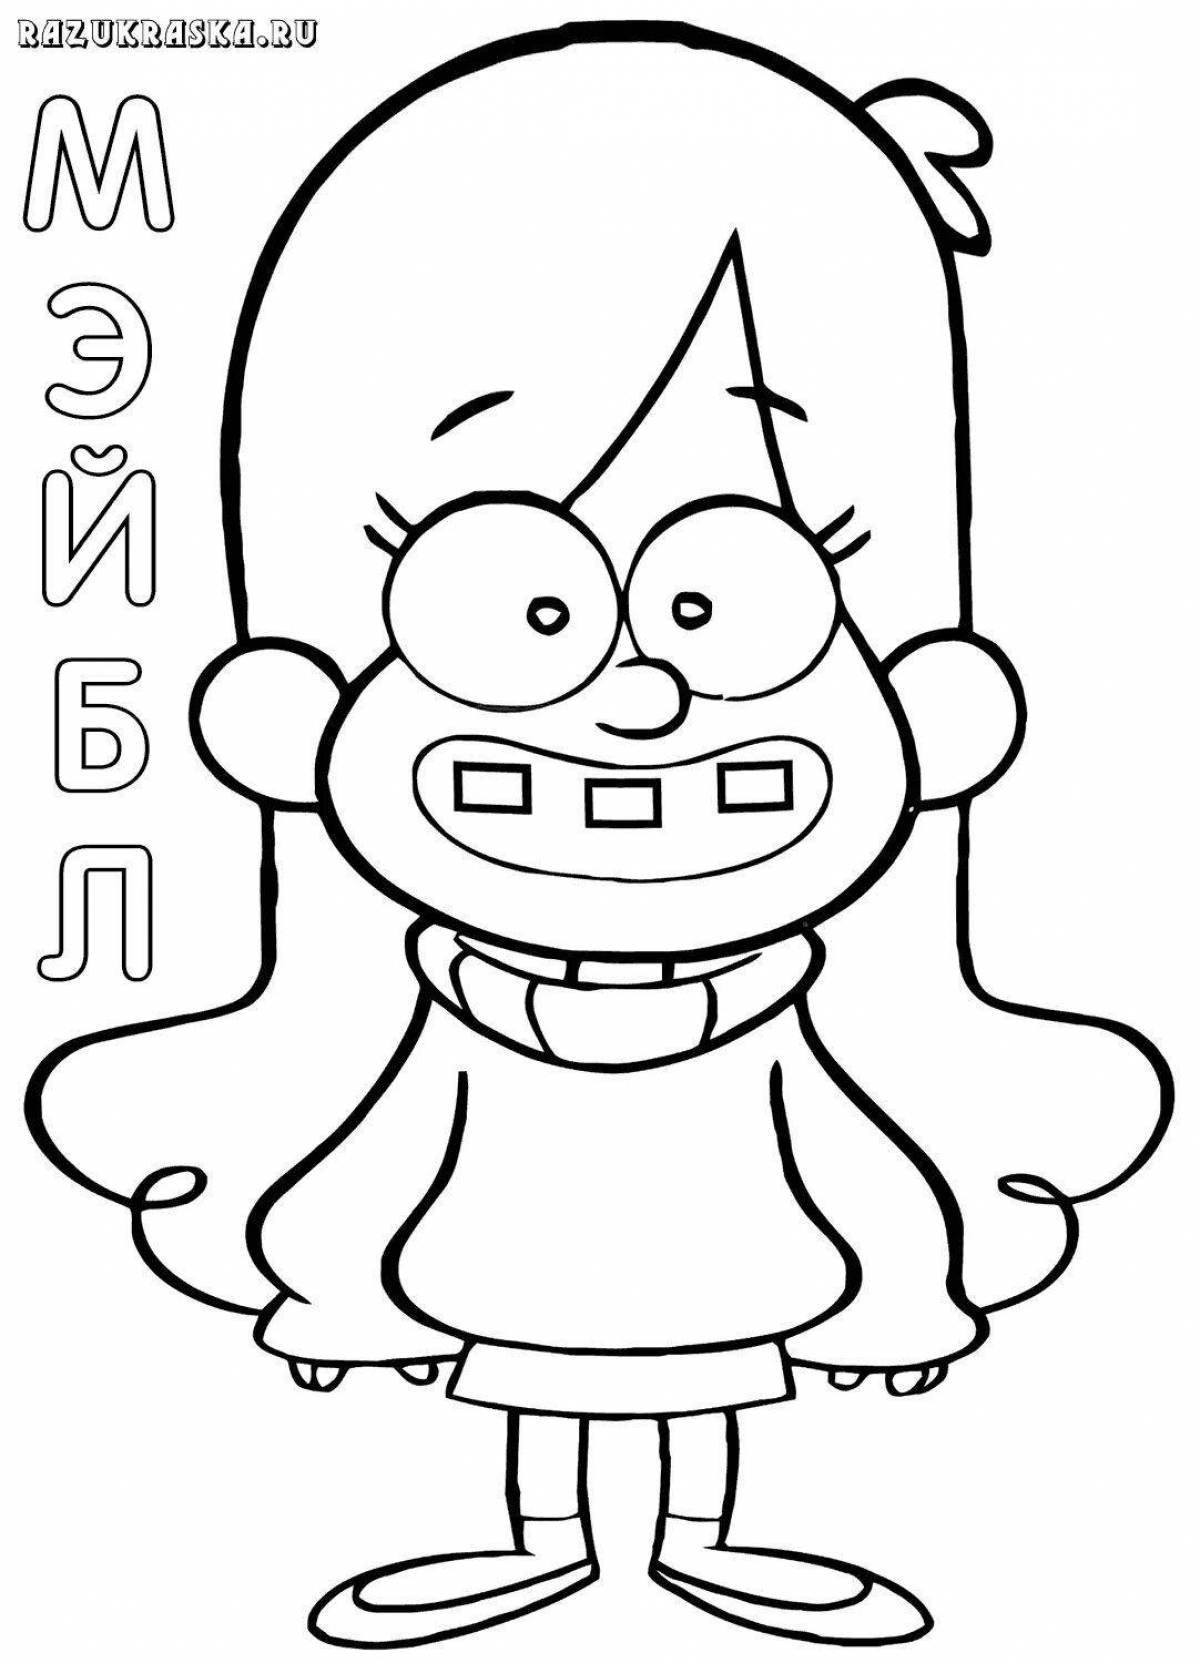 Mabel's fancy coloring book